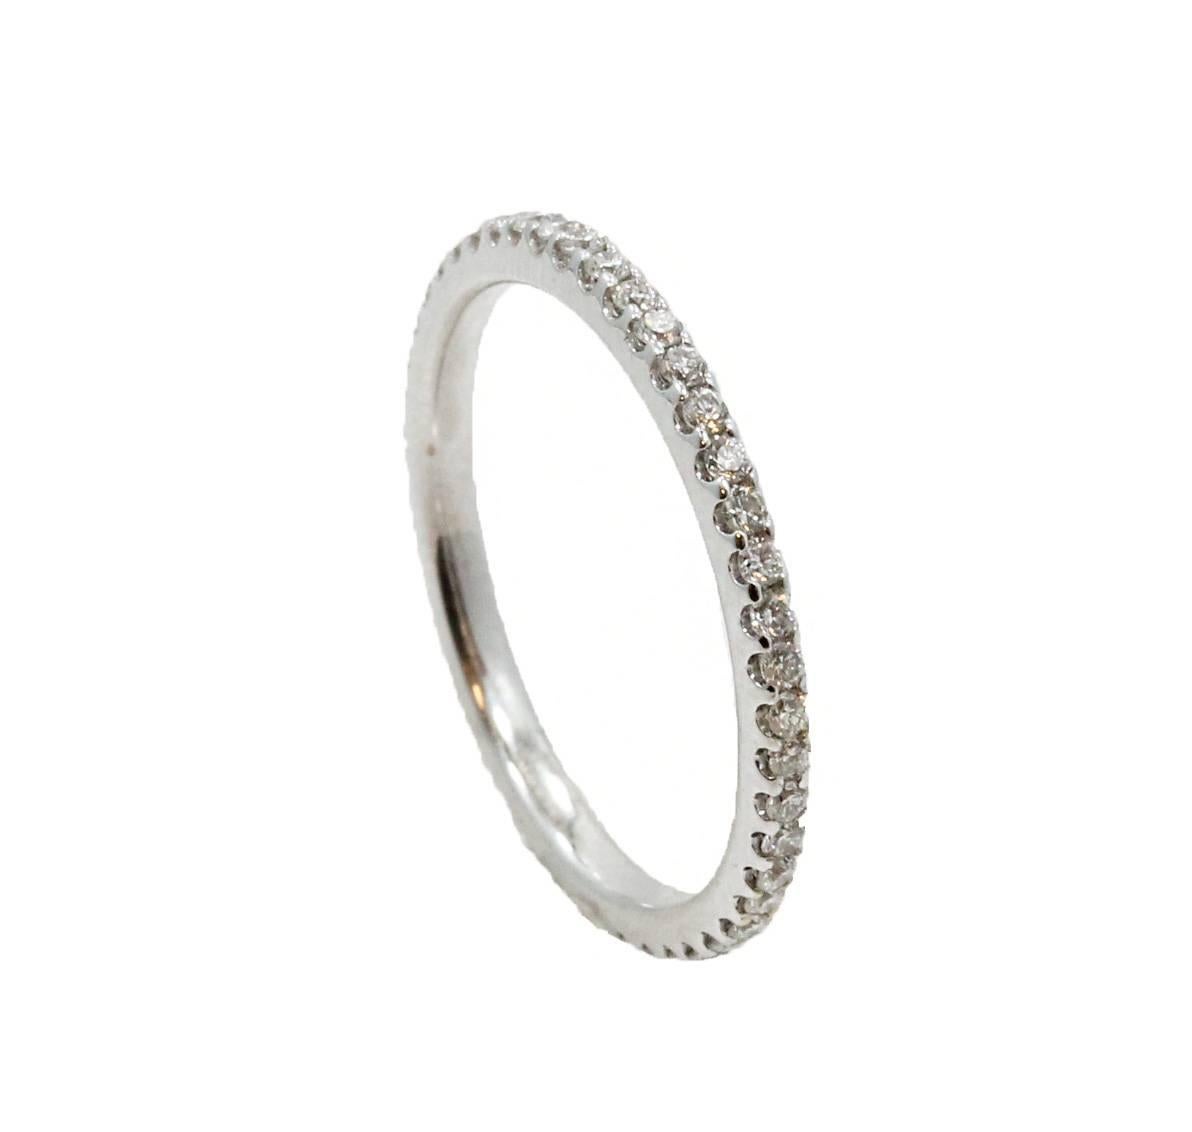 18K White Gold Eternity Band With 46 Diamonds G-H Color and VS-SI Clarity With a Total Carat Weight of 0.40.